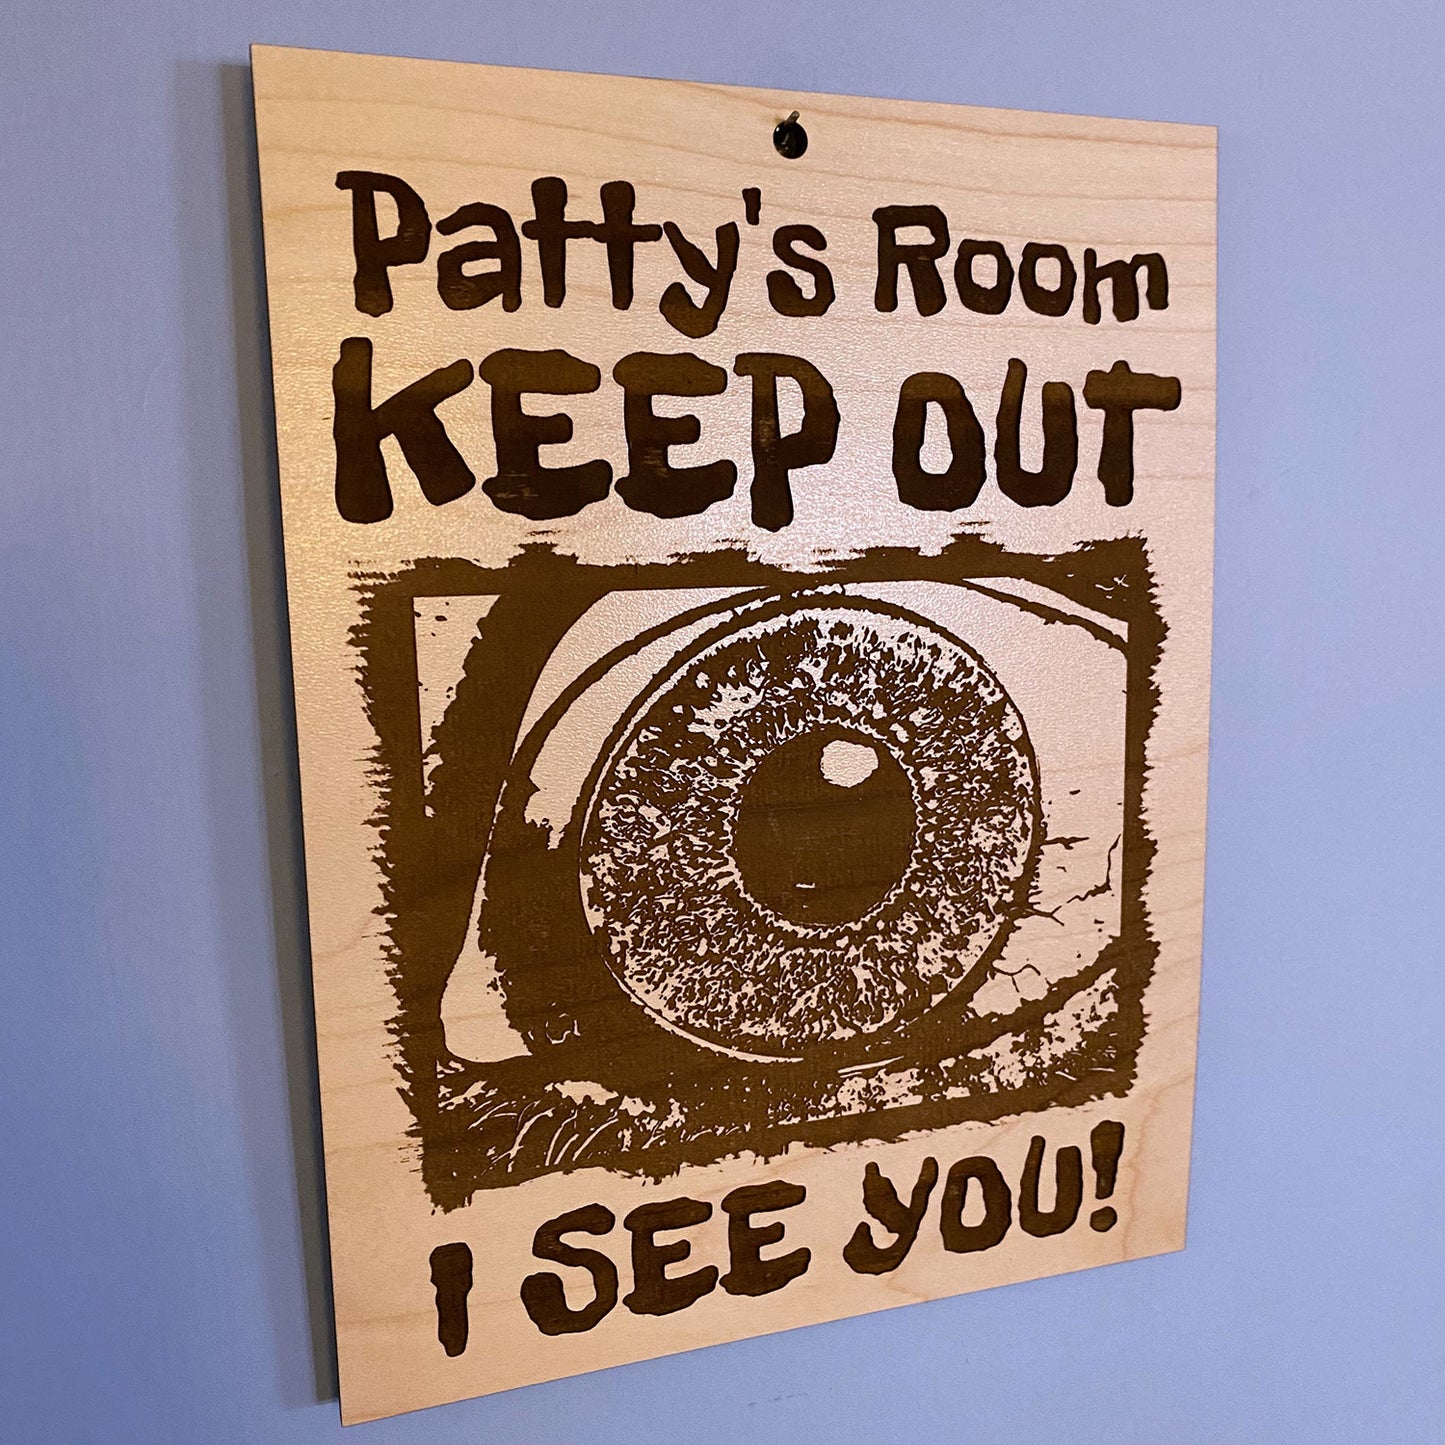 Customizable Room Sign with KEEP OUT and I SEE YOU! Fun Eyeball